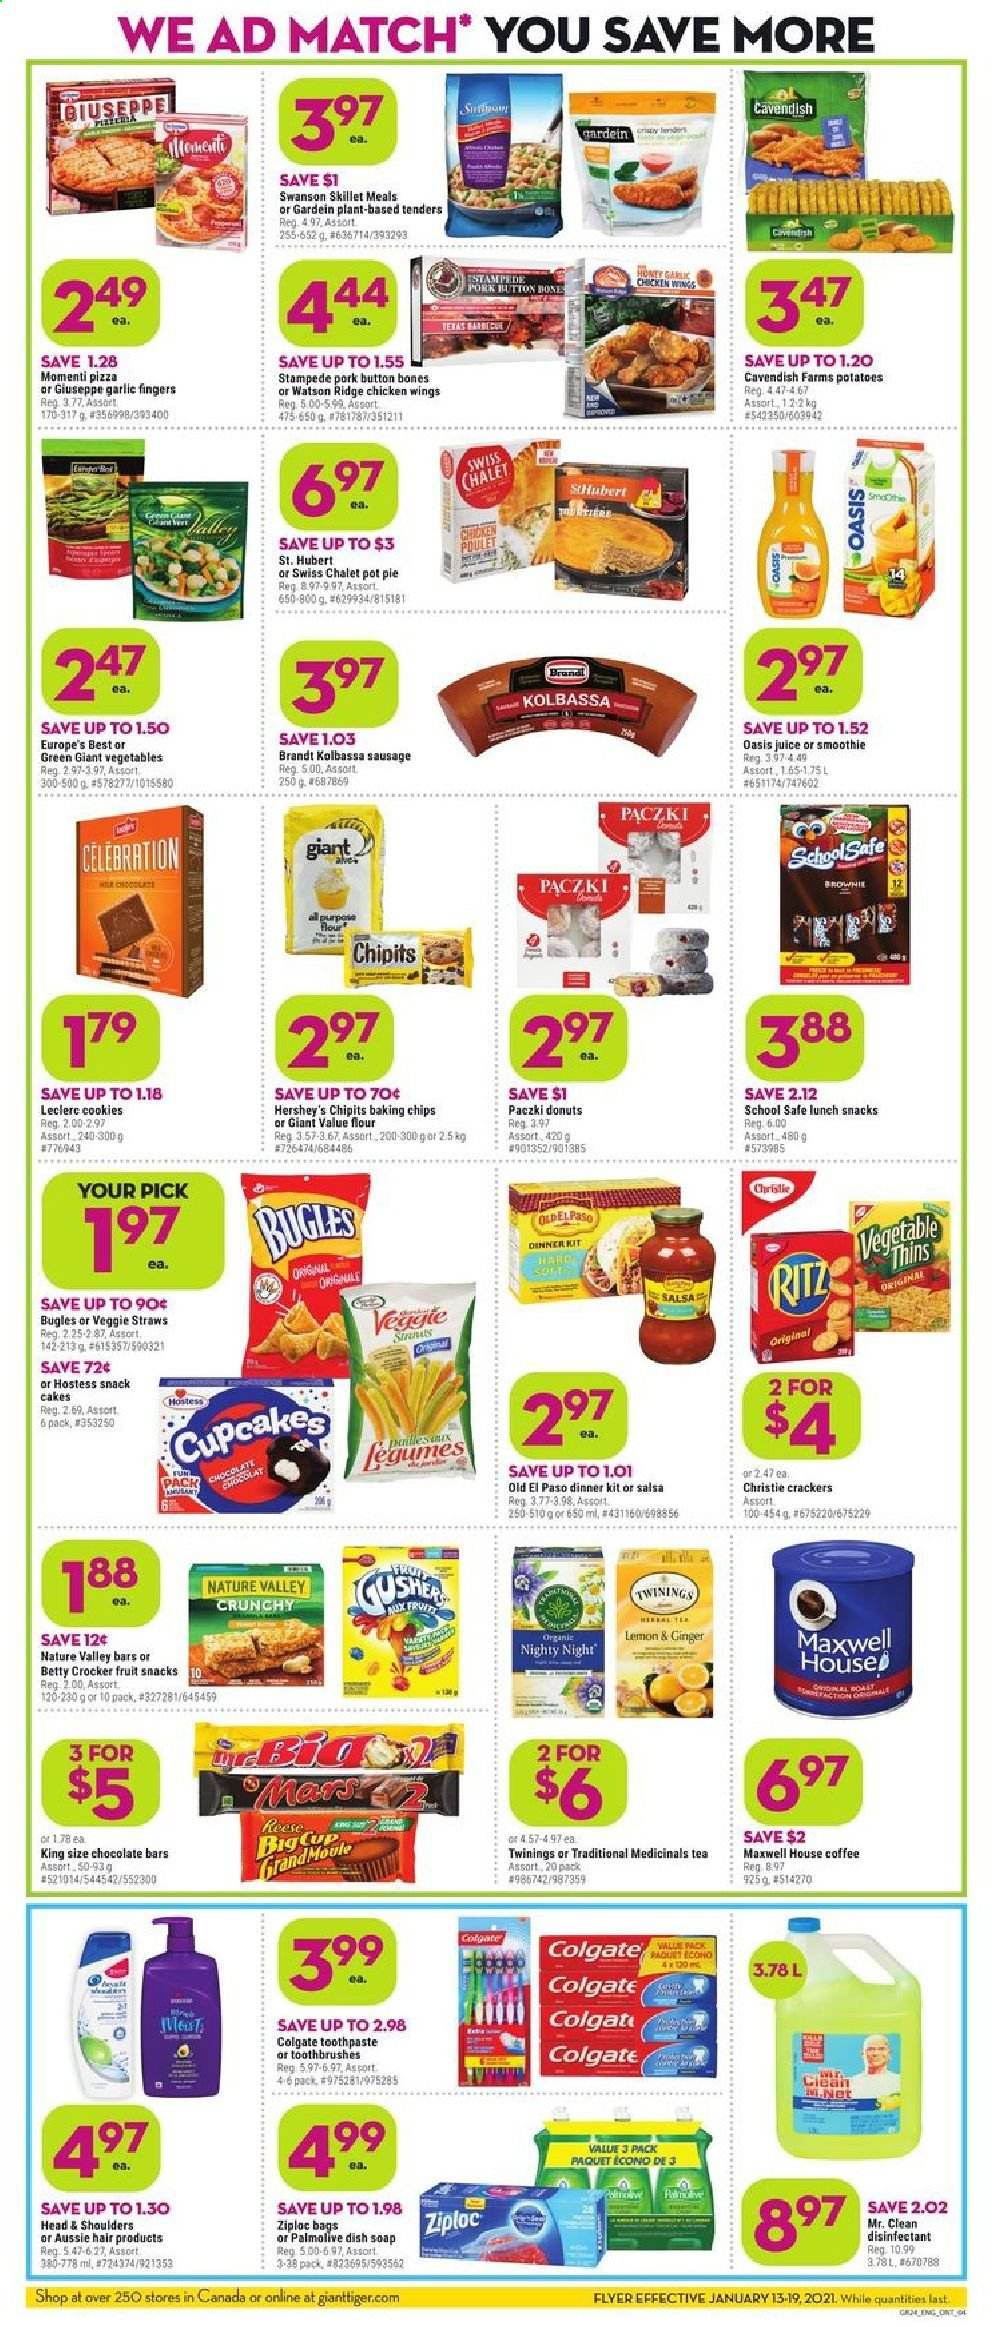 thumbnail - Giant Tiger Flyer - January 13, 2021 - January 19, 2021 - Sales products - cake, pie, Old El Paso, cupcake, pot pie, donut, paczki, garlic, potatoes, pizza, dinner kit, sausage, Rama, Hershey's, chicken wings, cookies, Mars, crackers, fruit snack, RITZ, chocolate bar, Thins, veggie straws, flour, baking chips, Nature Valley, salsa, honey, juice, smoothie, Maxwell House, tea, Twinings, soap, toothpaste, Aussie, Ziploc, pot, cup, Head & Shoulders, desinfection. Page 2.